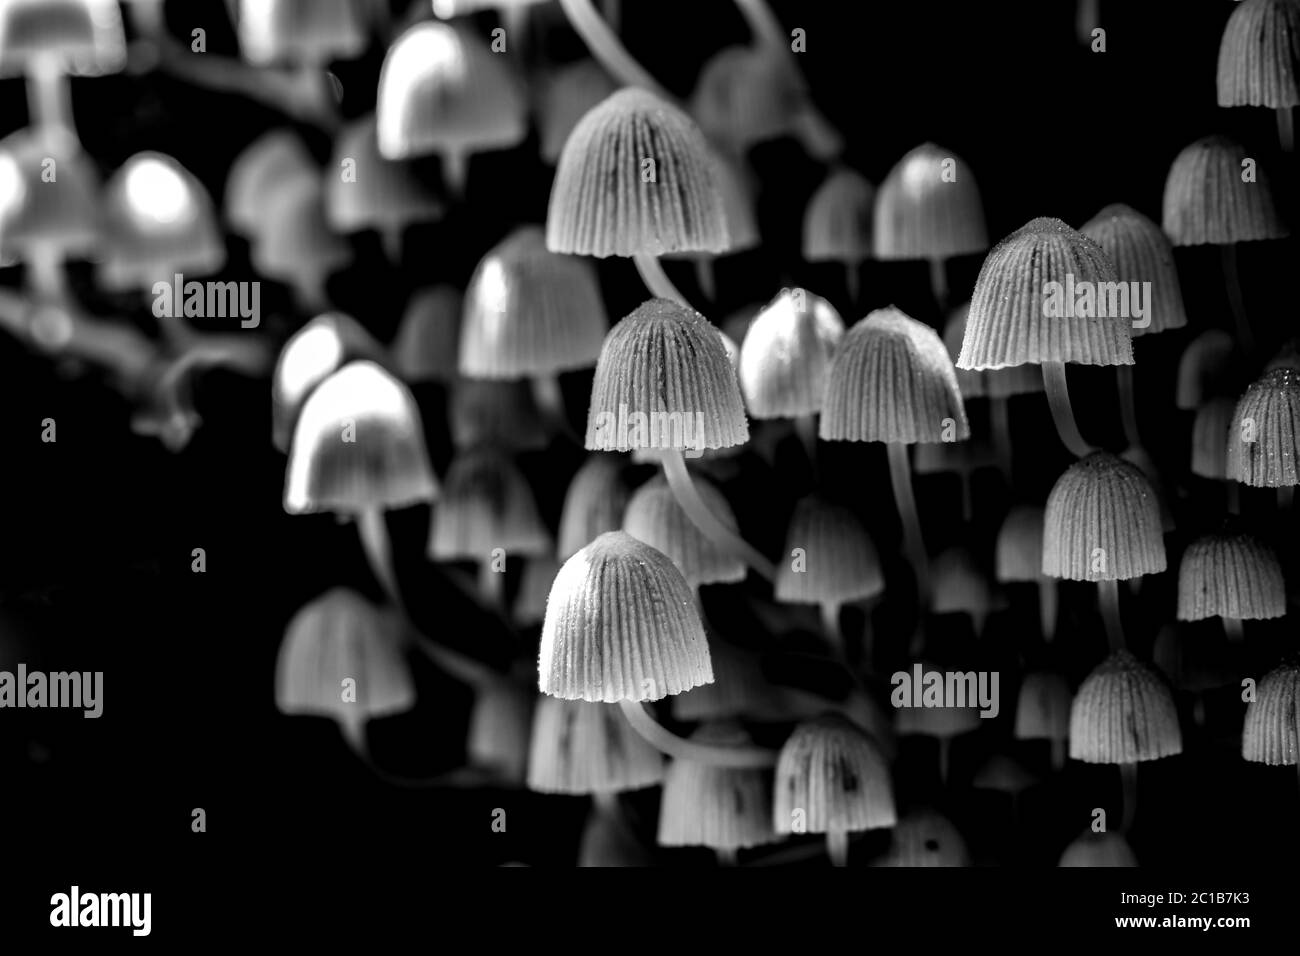 Black and white image of a cluster of fairy inkcup fungi, Coprinellus disseminatus, from the Psathyrellaceae family Stock Photo